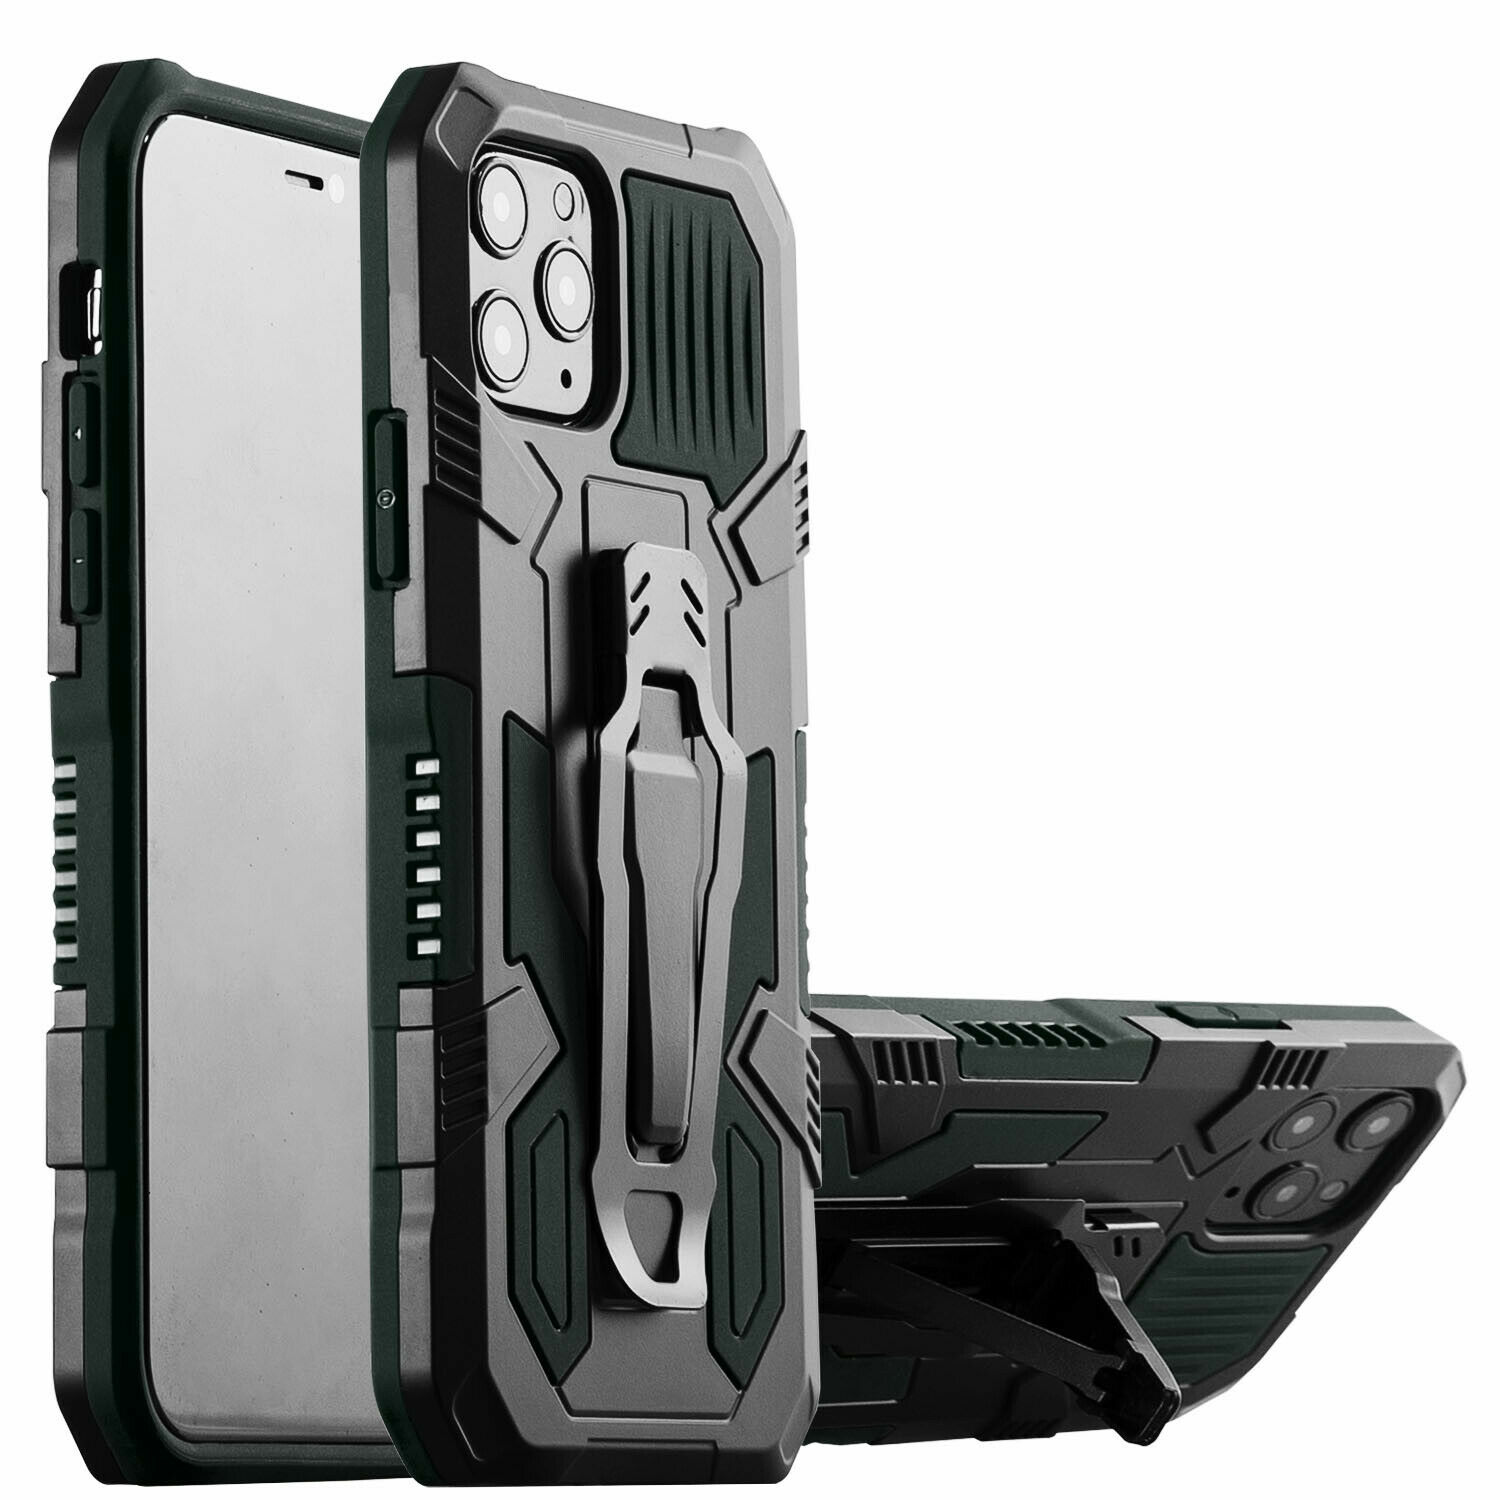 Heavy Duty Armor Hybrid Stand Clip case for IPhone 12